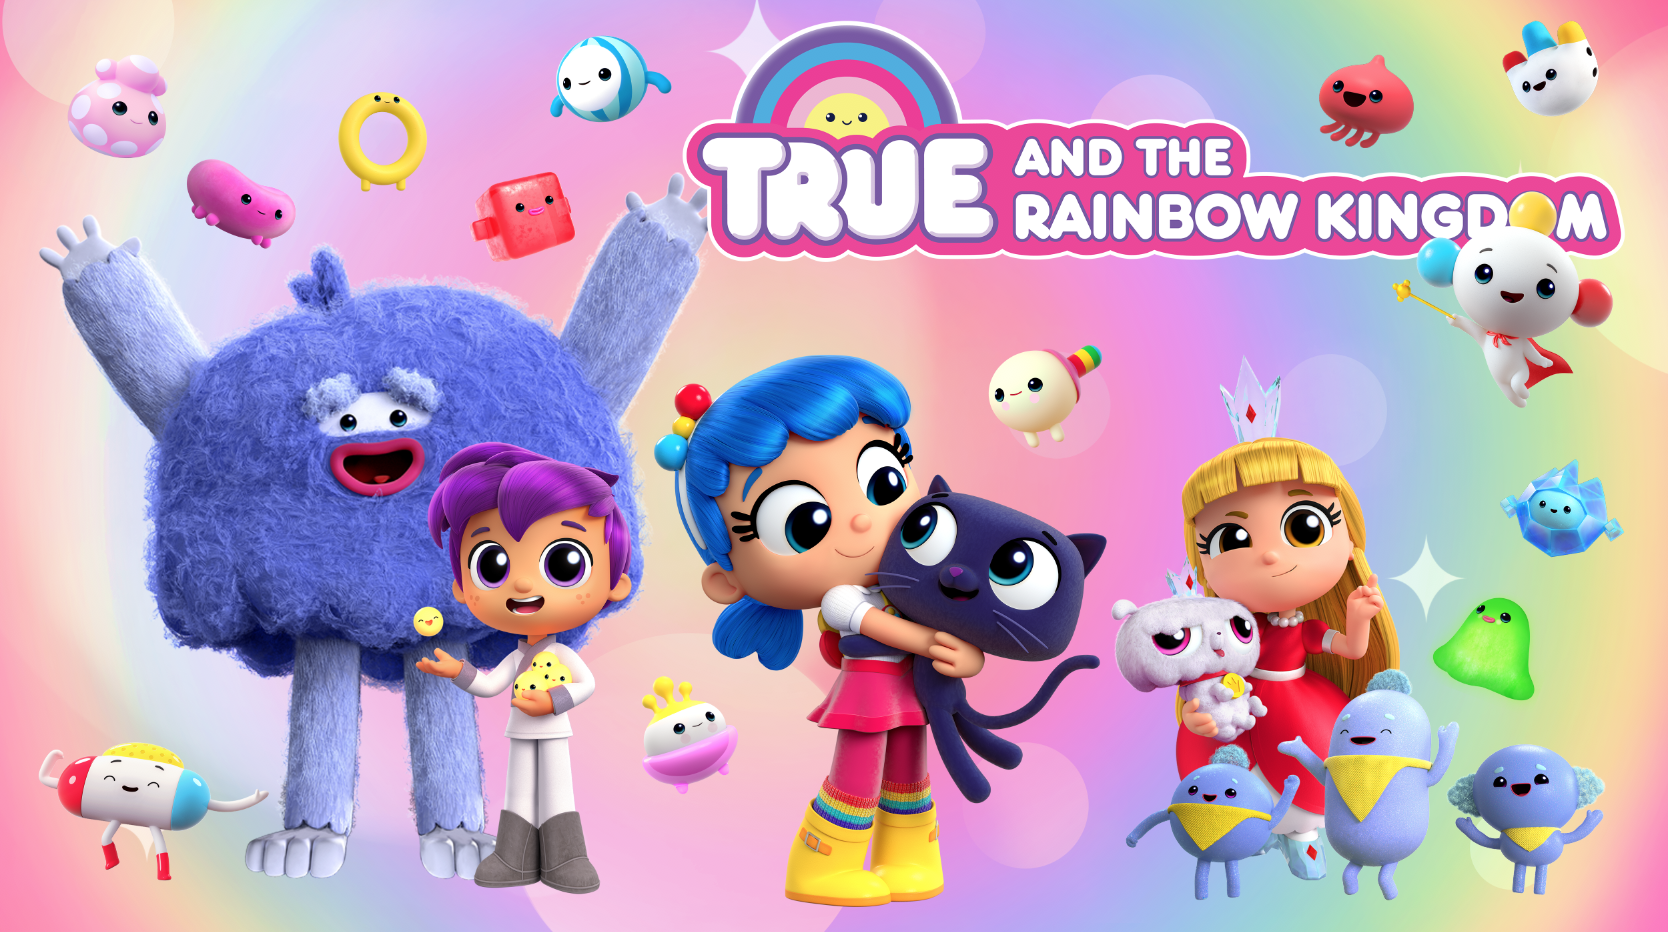 True and the Rainbow Kingdom Art Collective